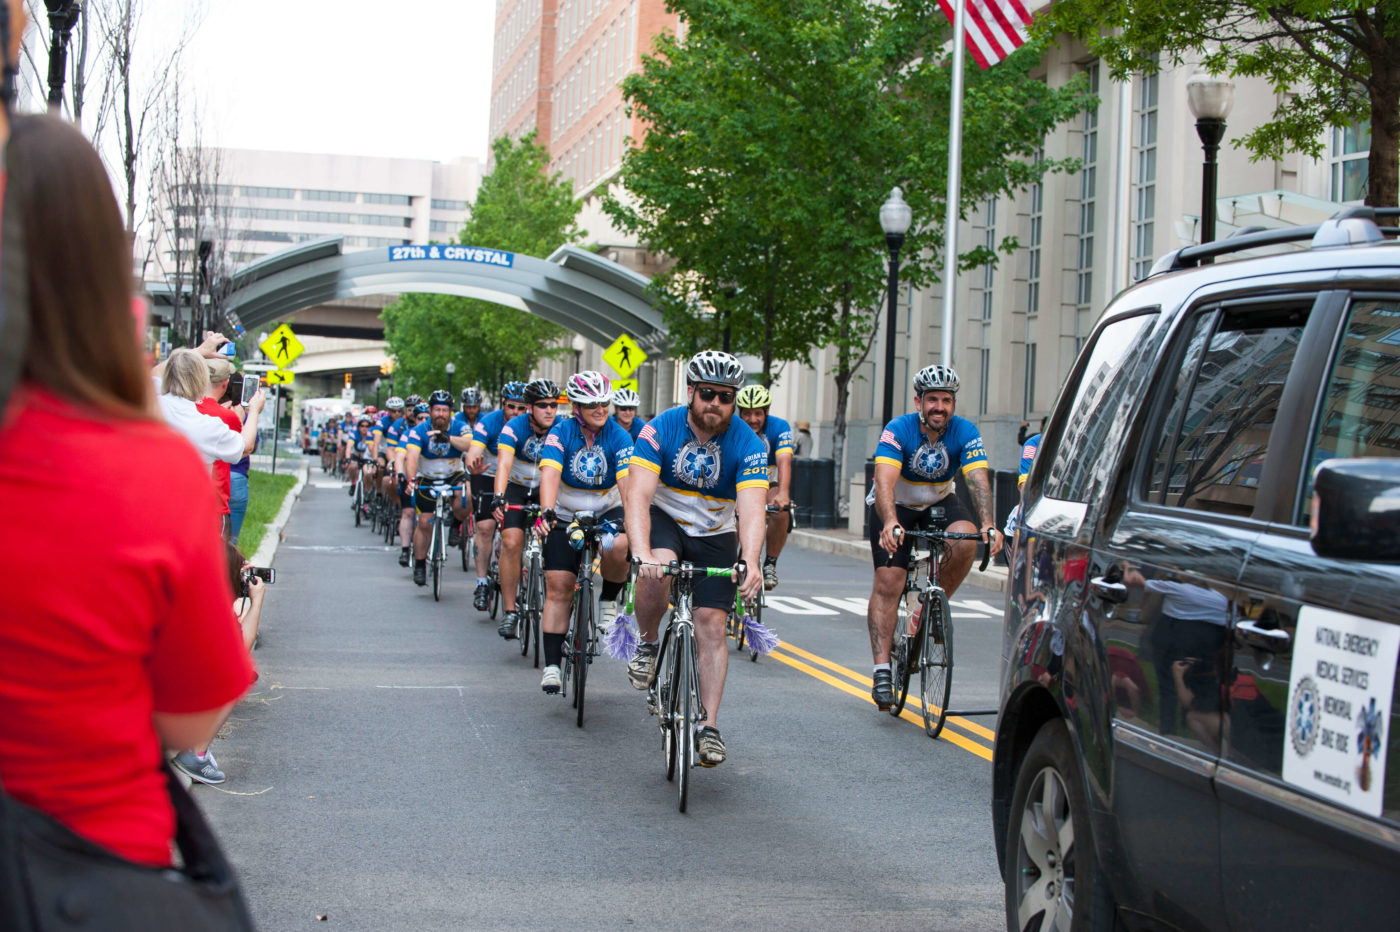 Each rider in the National EMS Memorial Bike Ride honors a fallen EMS responder.